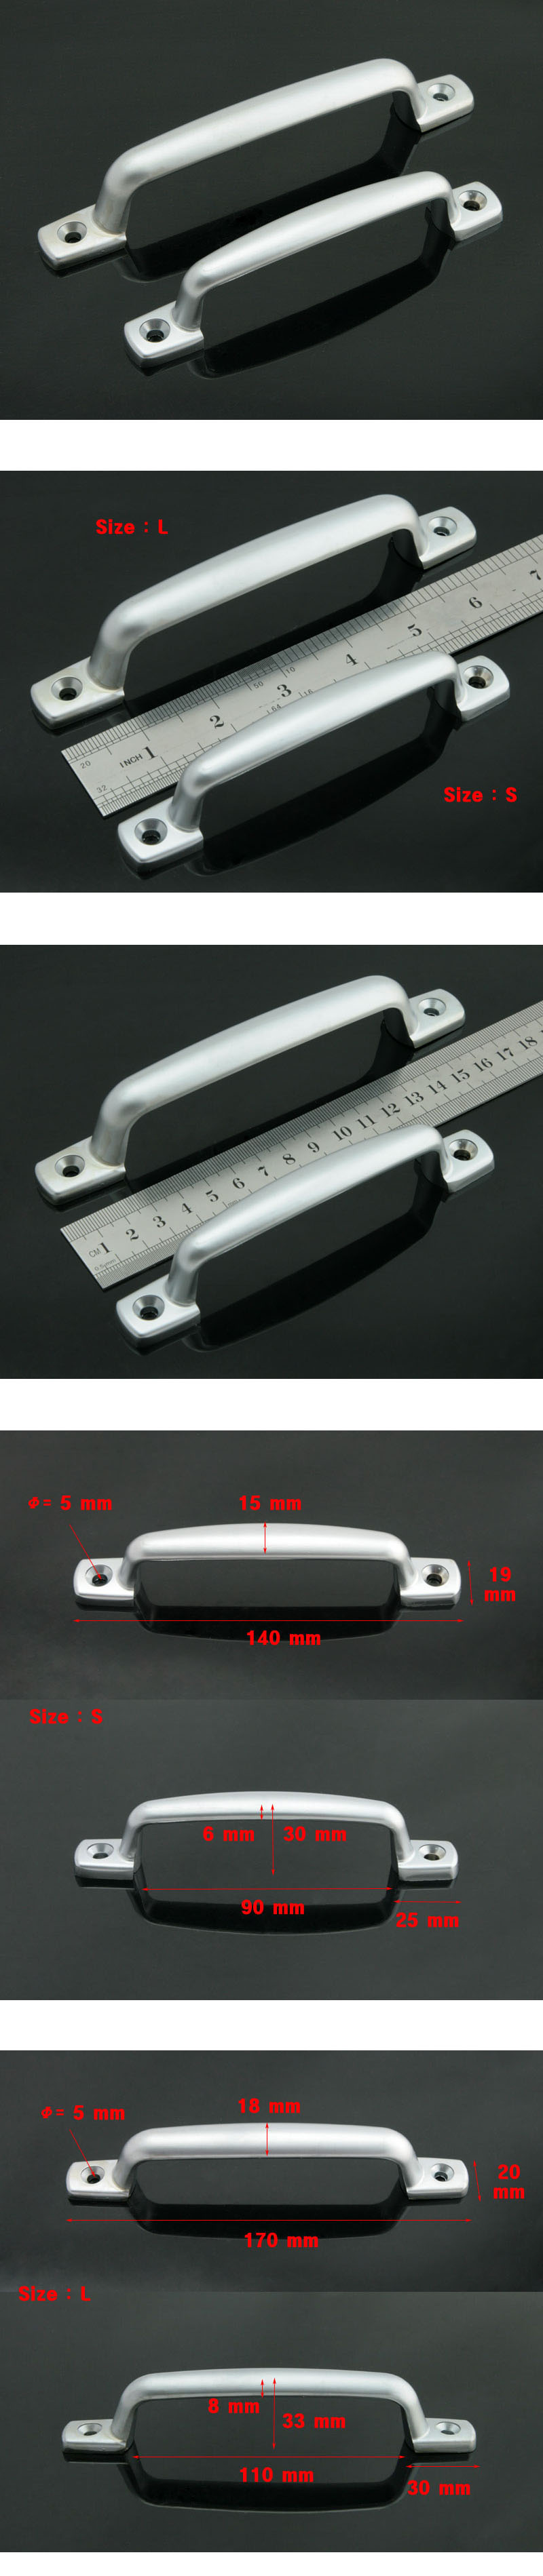 Detail Image of H192005 Simple S Handle